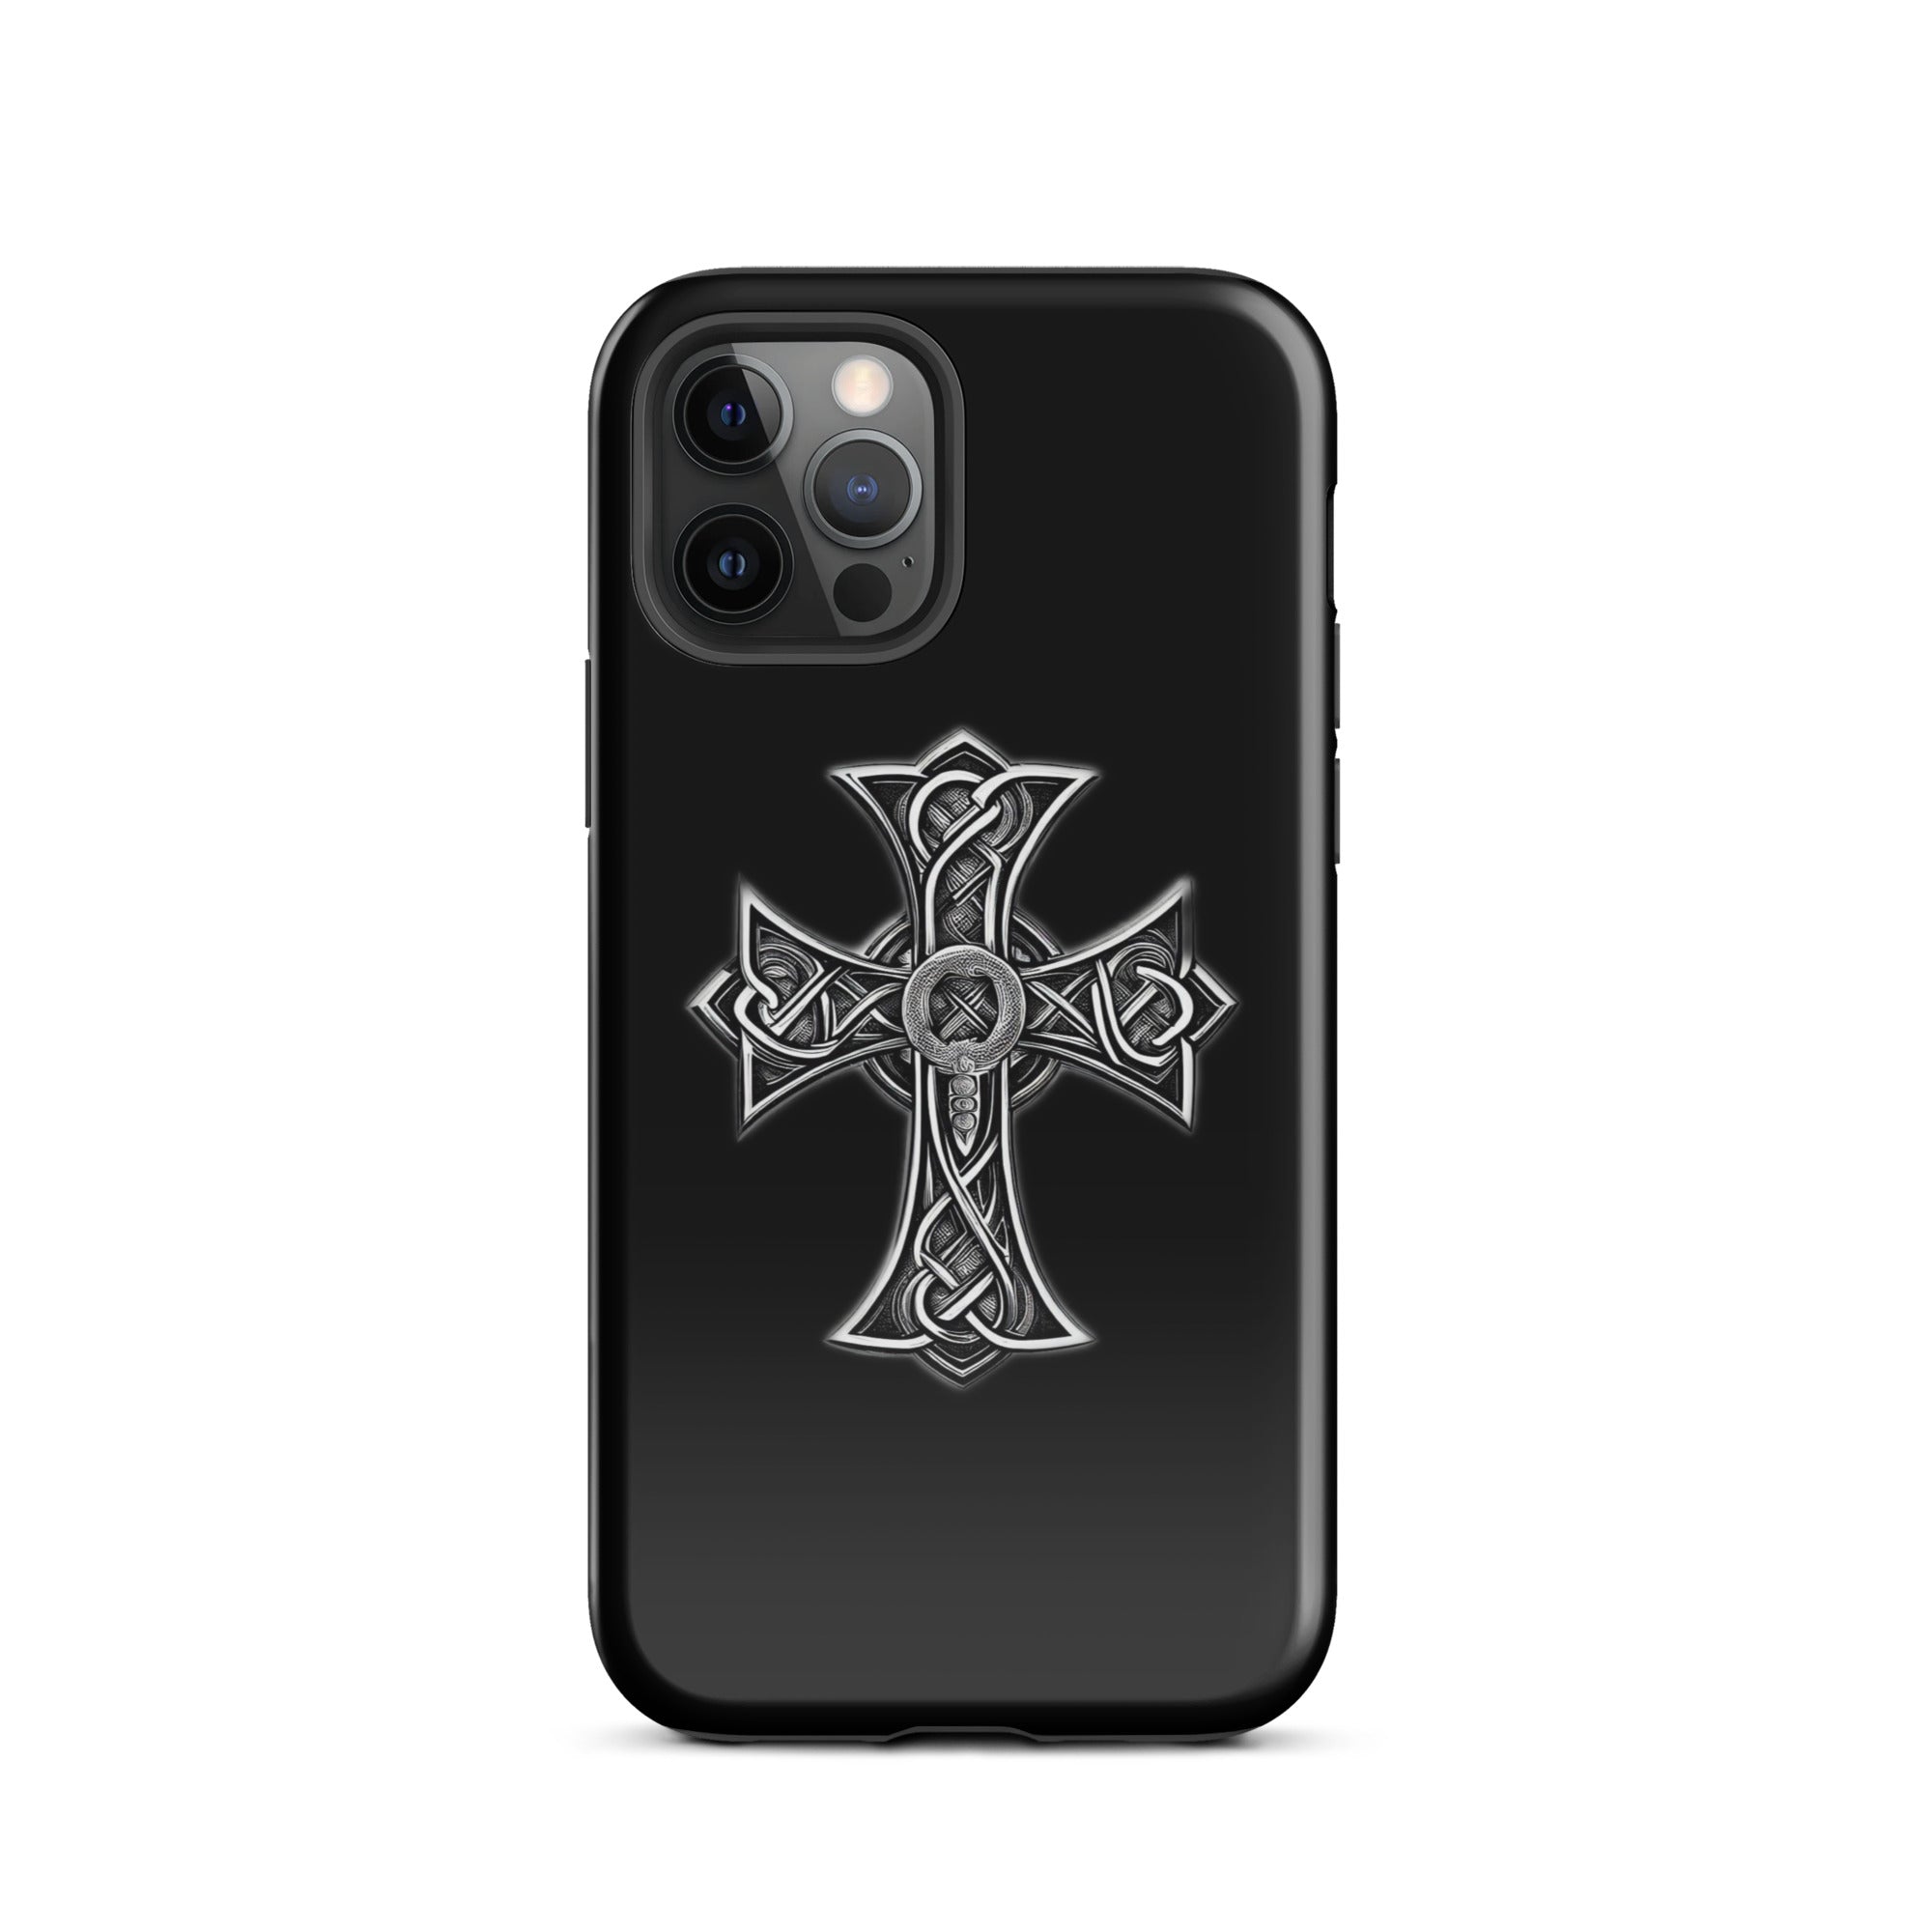 tough-case-for-iphone-glossy-iphone-12-pro-front-6563851a37600.jpg